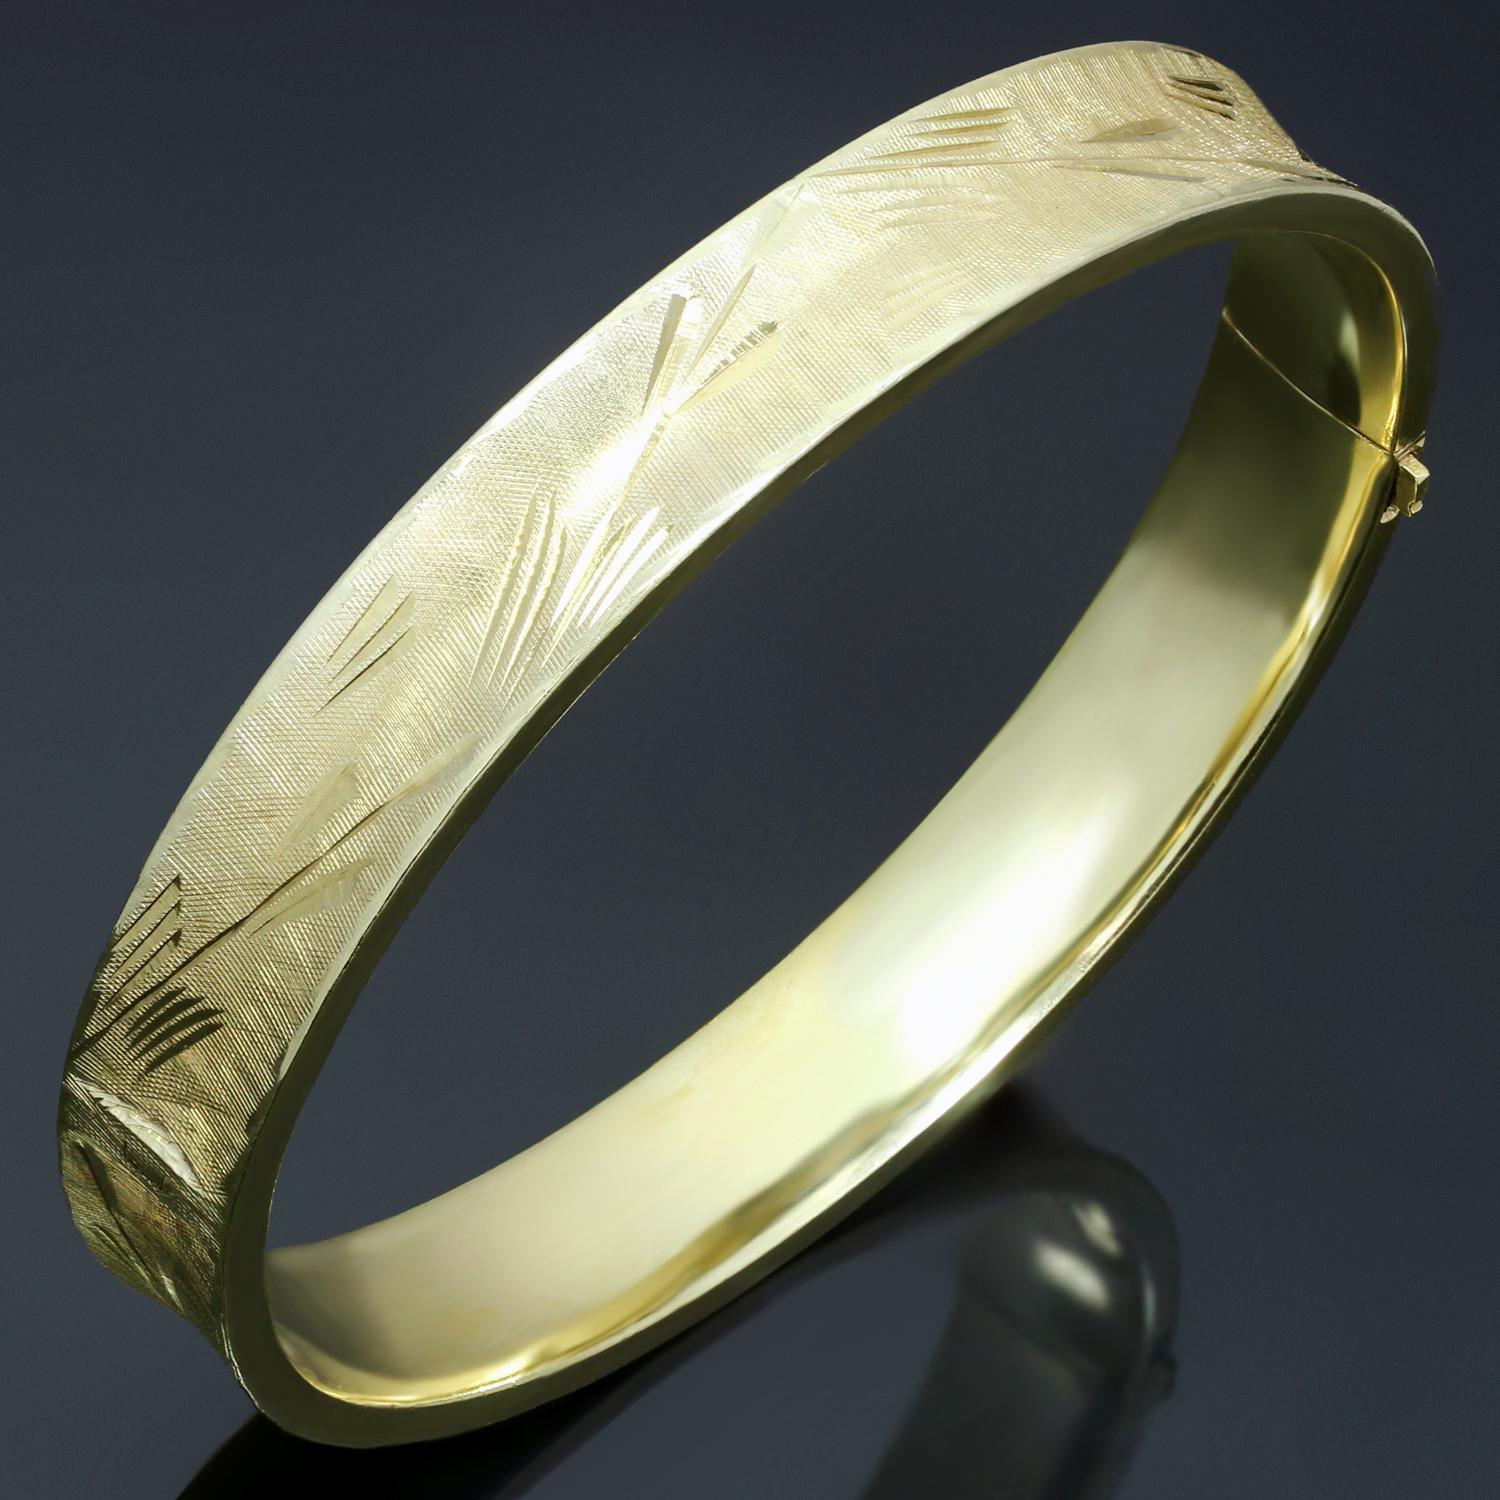 This elegant vintage bangle bracelet is crafted in 14k yellow gold and features hand-engraved filigree details. Made in United States circa 1980s. Measurements: 0.35